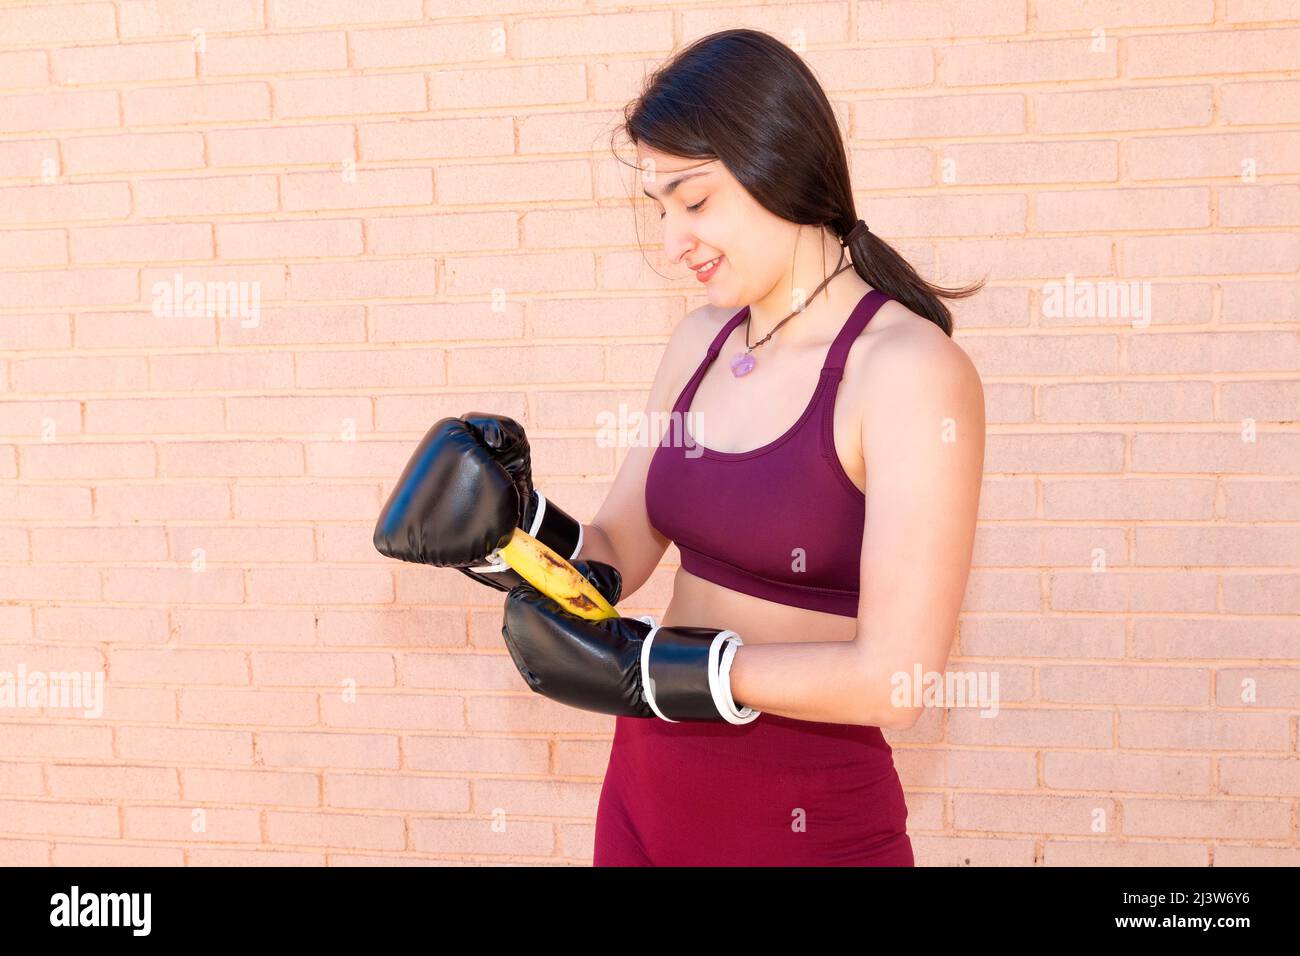 A young Caucasian woman is wearing black boxing gloves and trying to peel a banana. In the background is a brick wall. Stock Photo